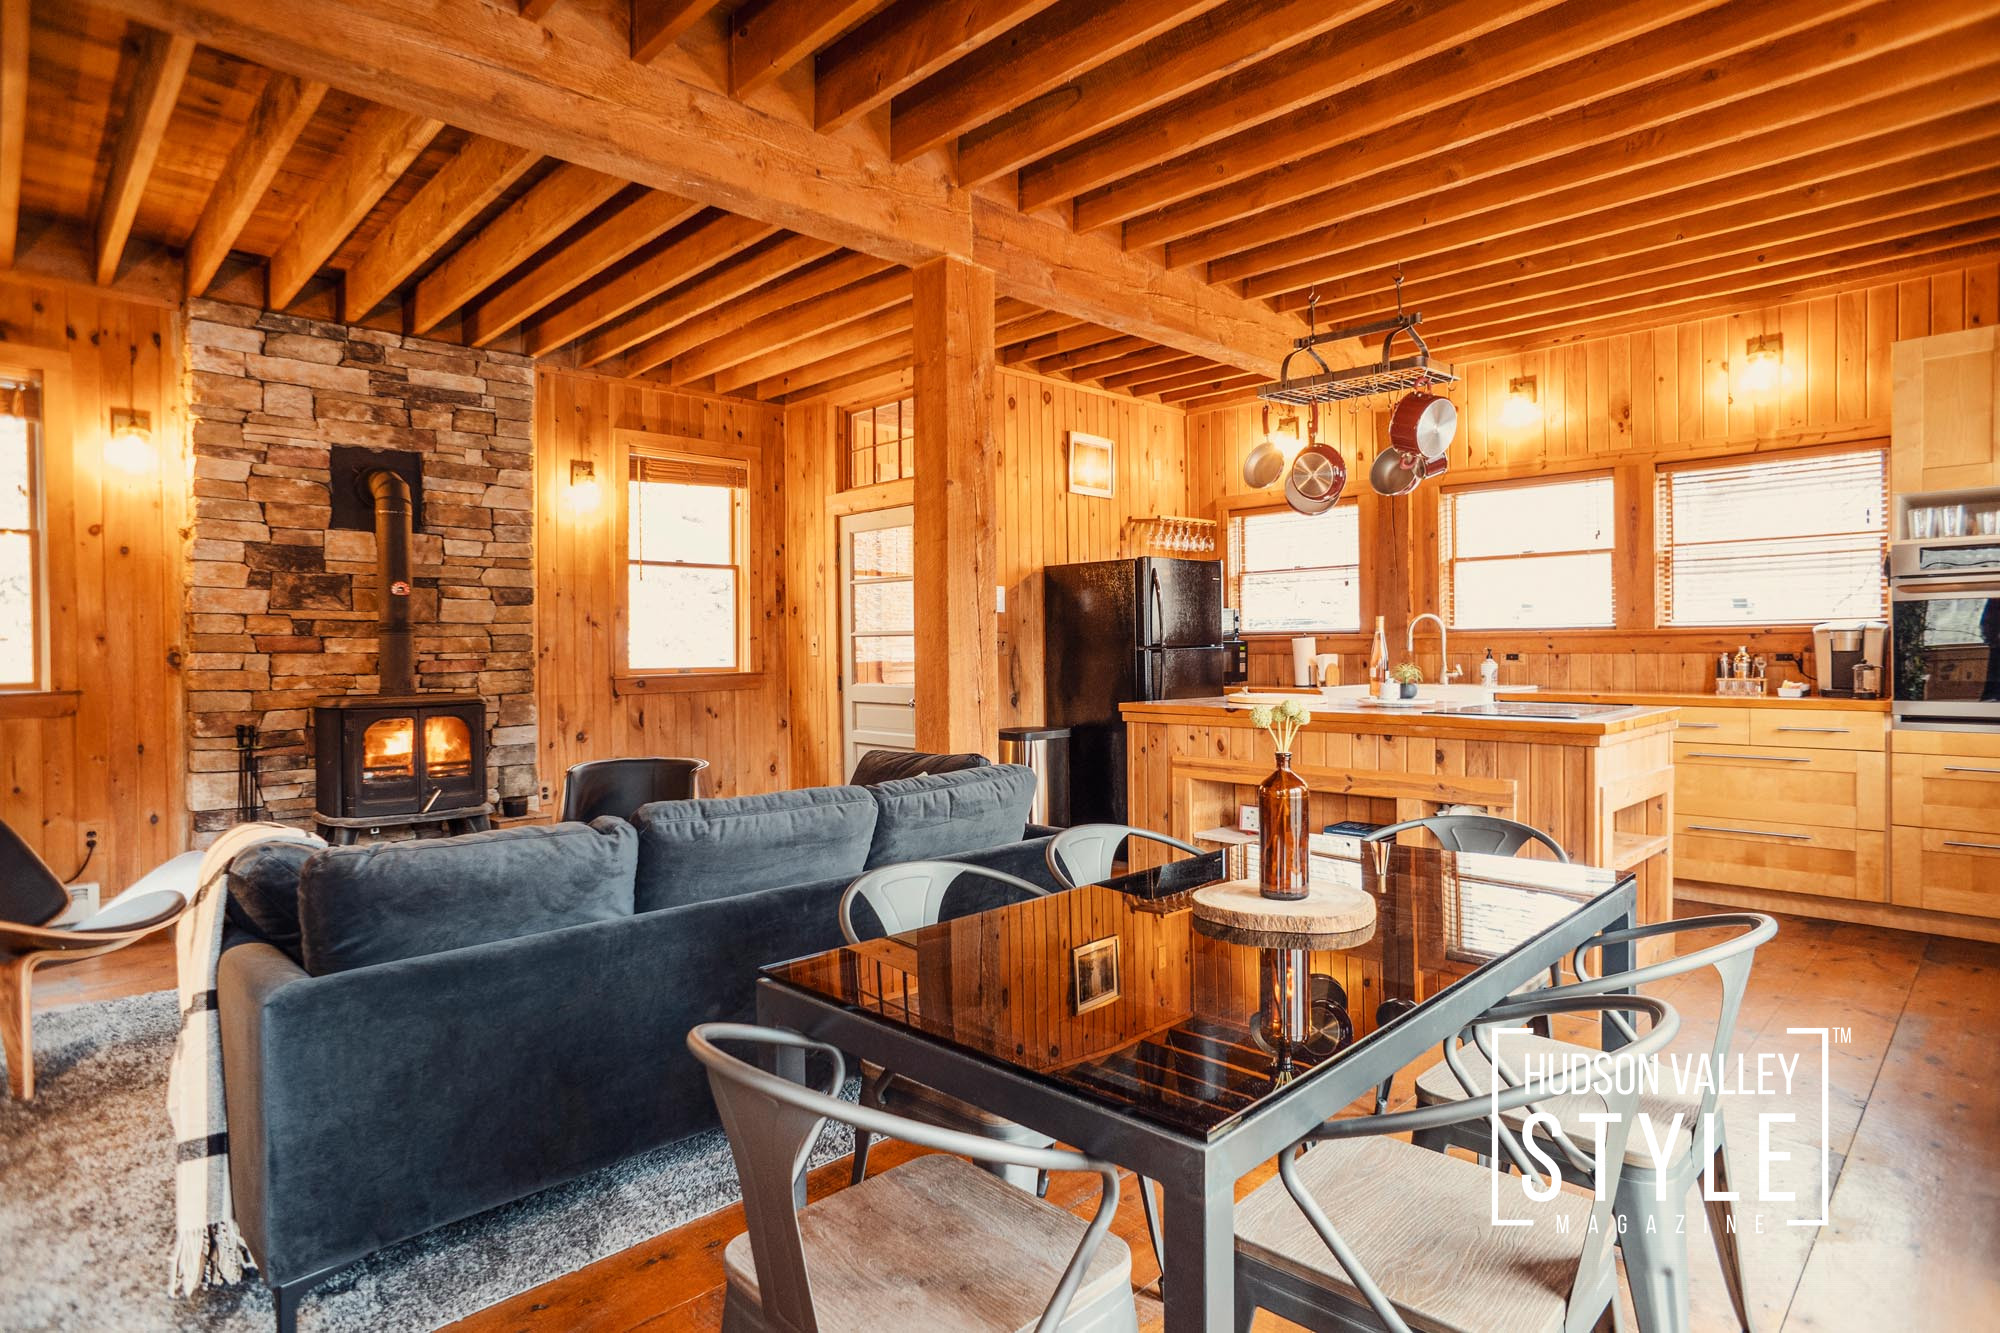 Connect with Nature and Unwind at the Hawks Nest Cabin Overlooking Delaware River – Airbnb Review by Photographer Maxwell Alexander